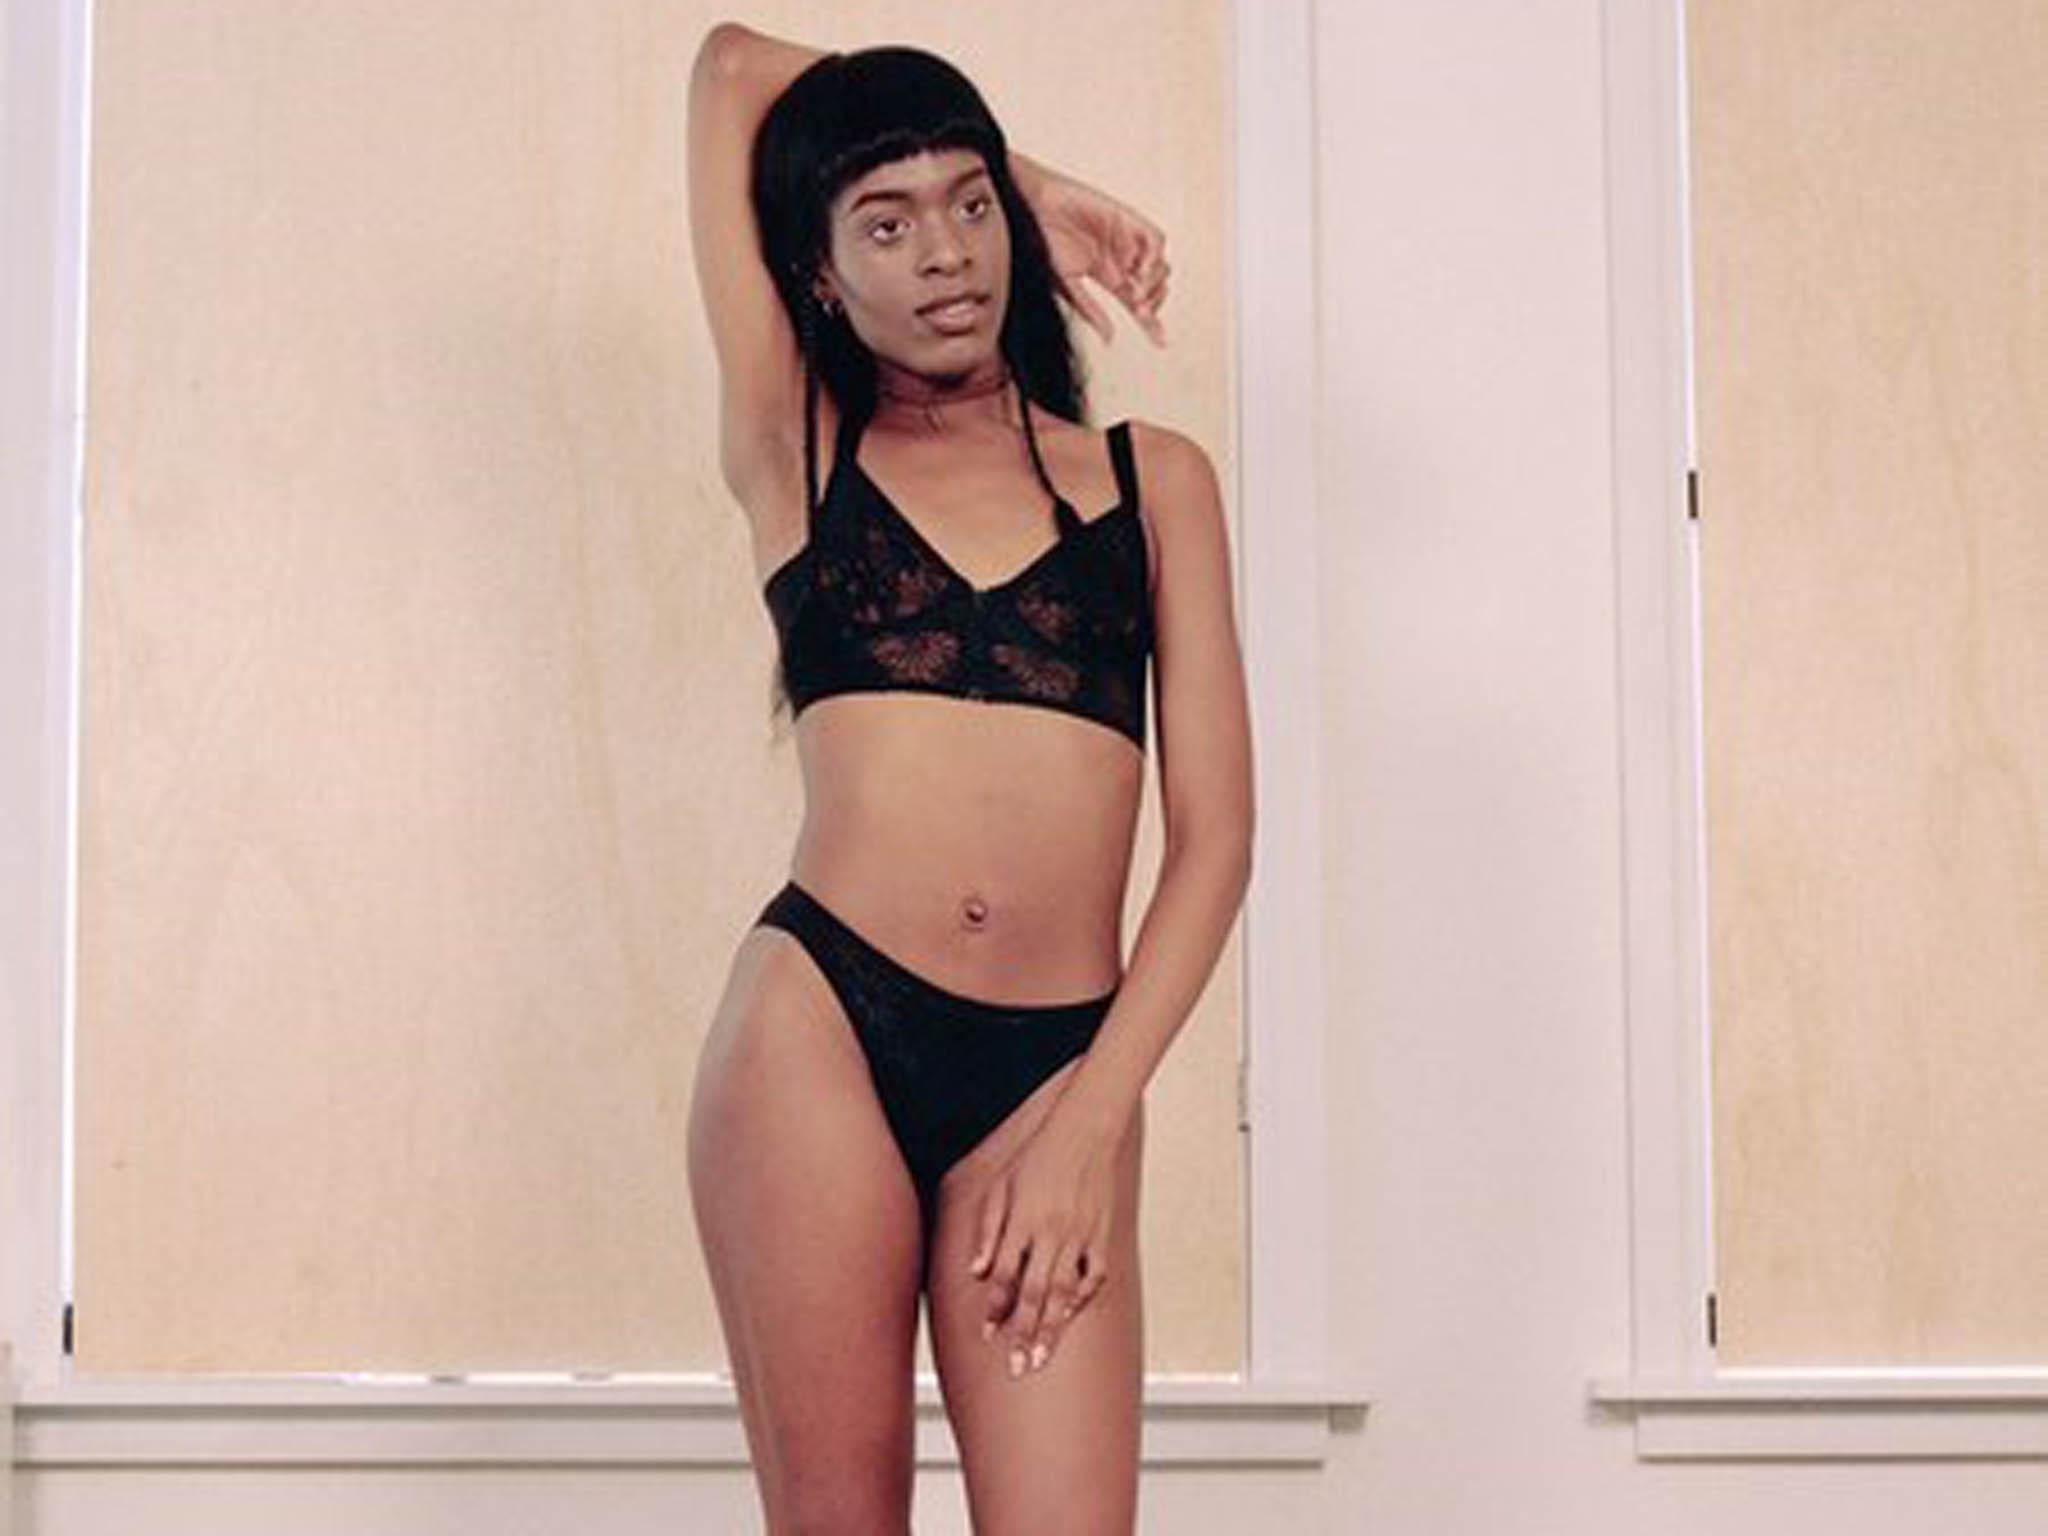 Lonely Lingerie's new body positive campaign fronted by